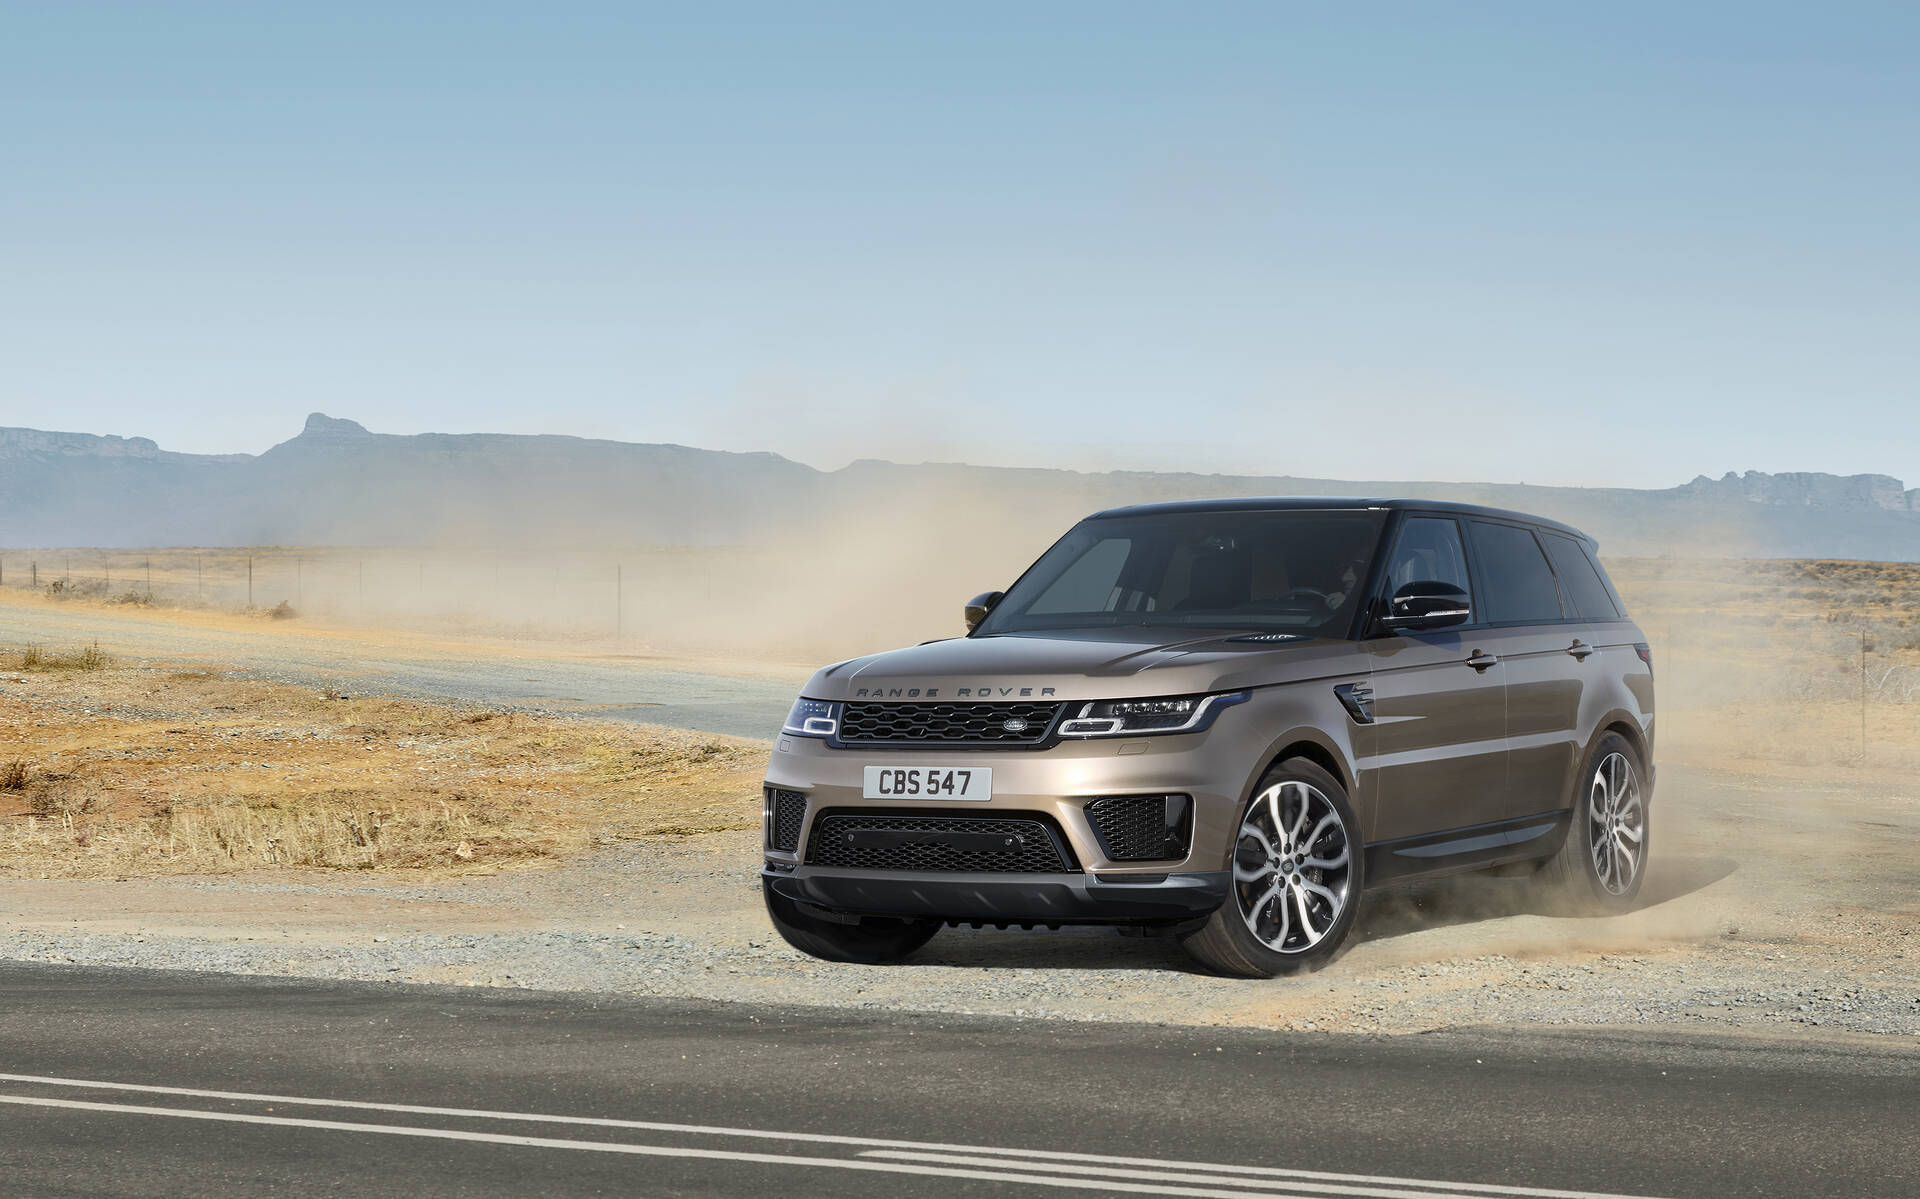 2021 Land Rover Range Rover - News, reviews, picture galleries and videos -  The Car Guide